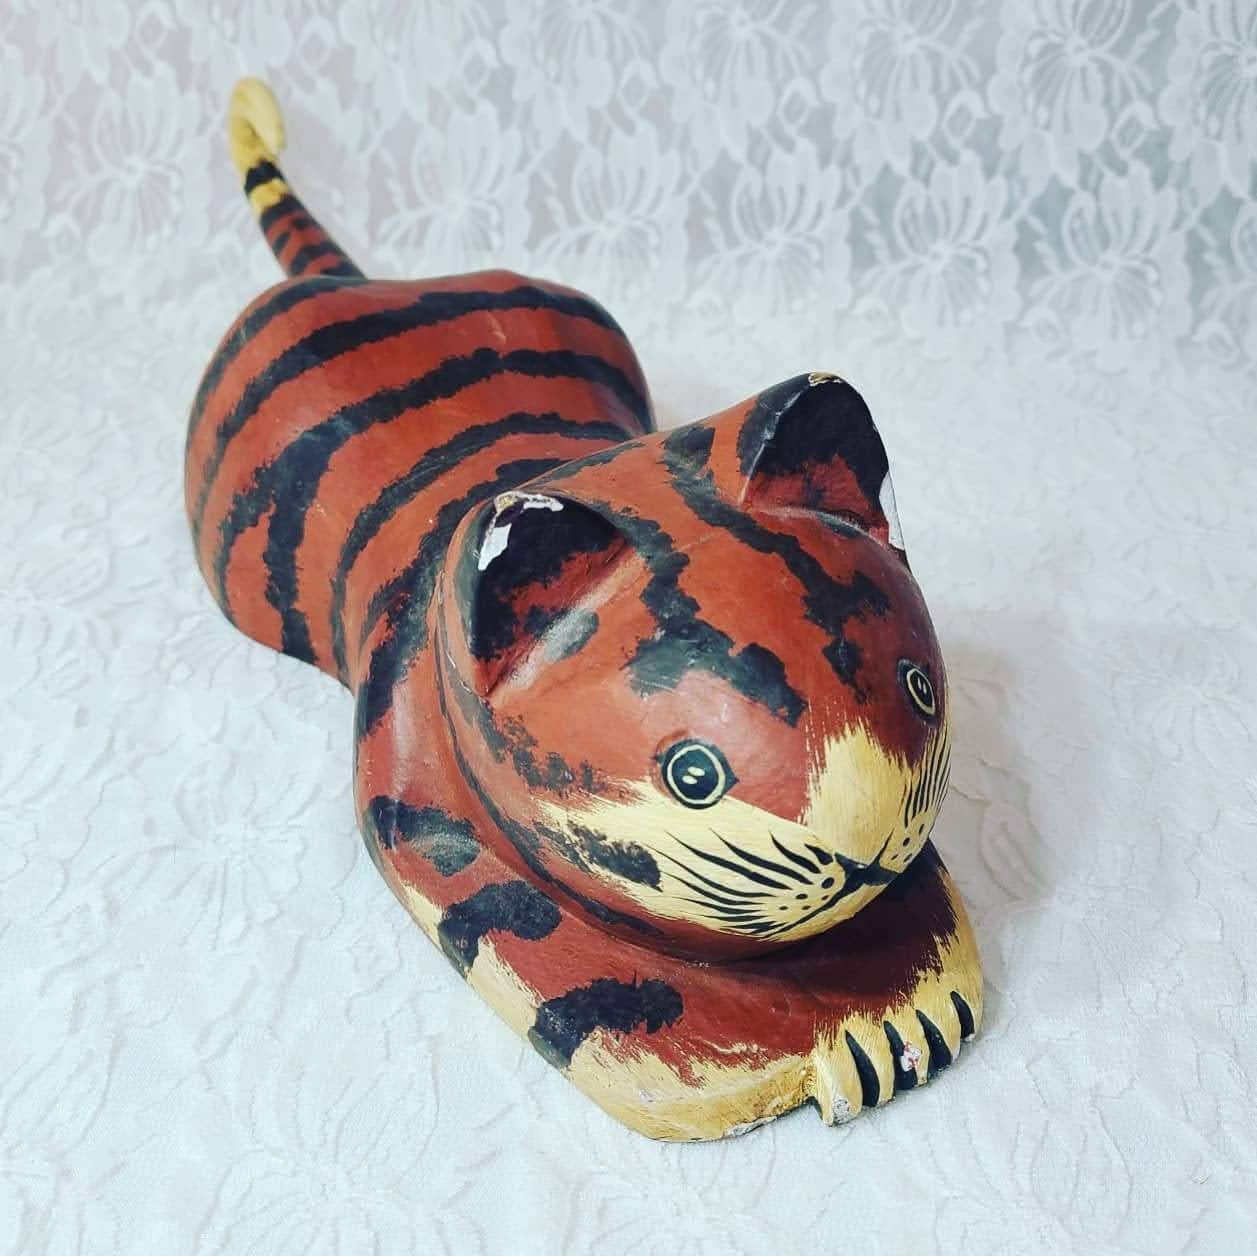 Hand Painted Wooden Folk Art Cat ~ Vintage 1960 Laying Down Kitty Kat Statue ~ 16" long by 5" wide and 7" tall